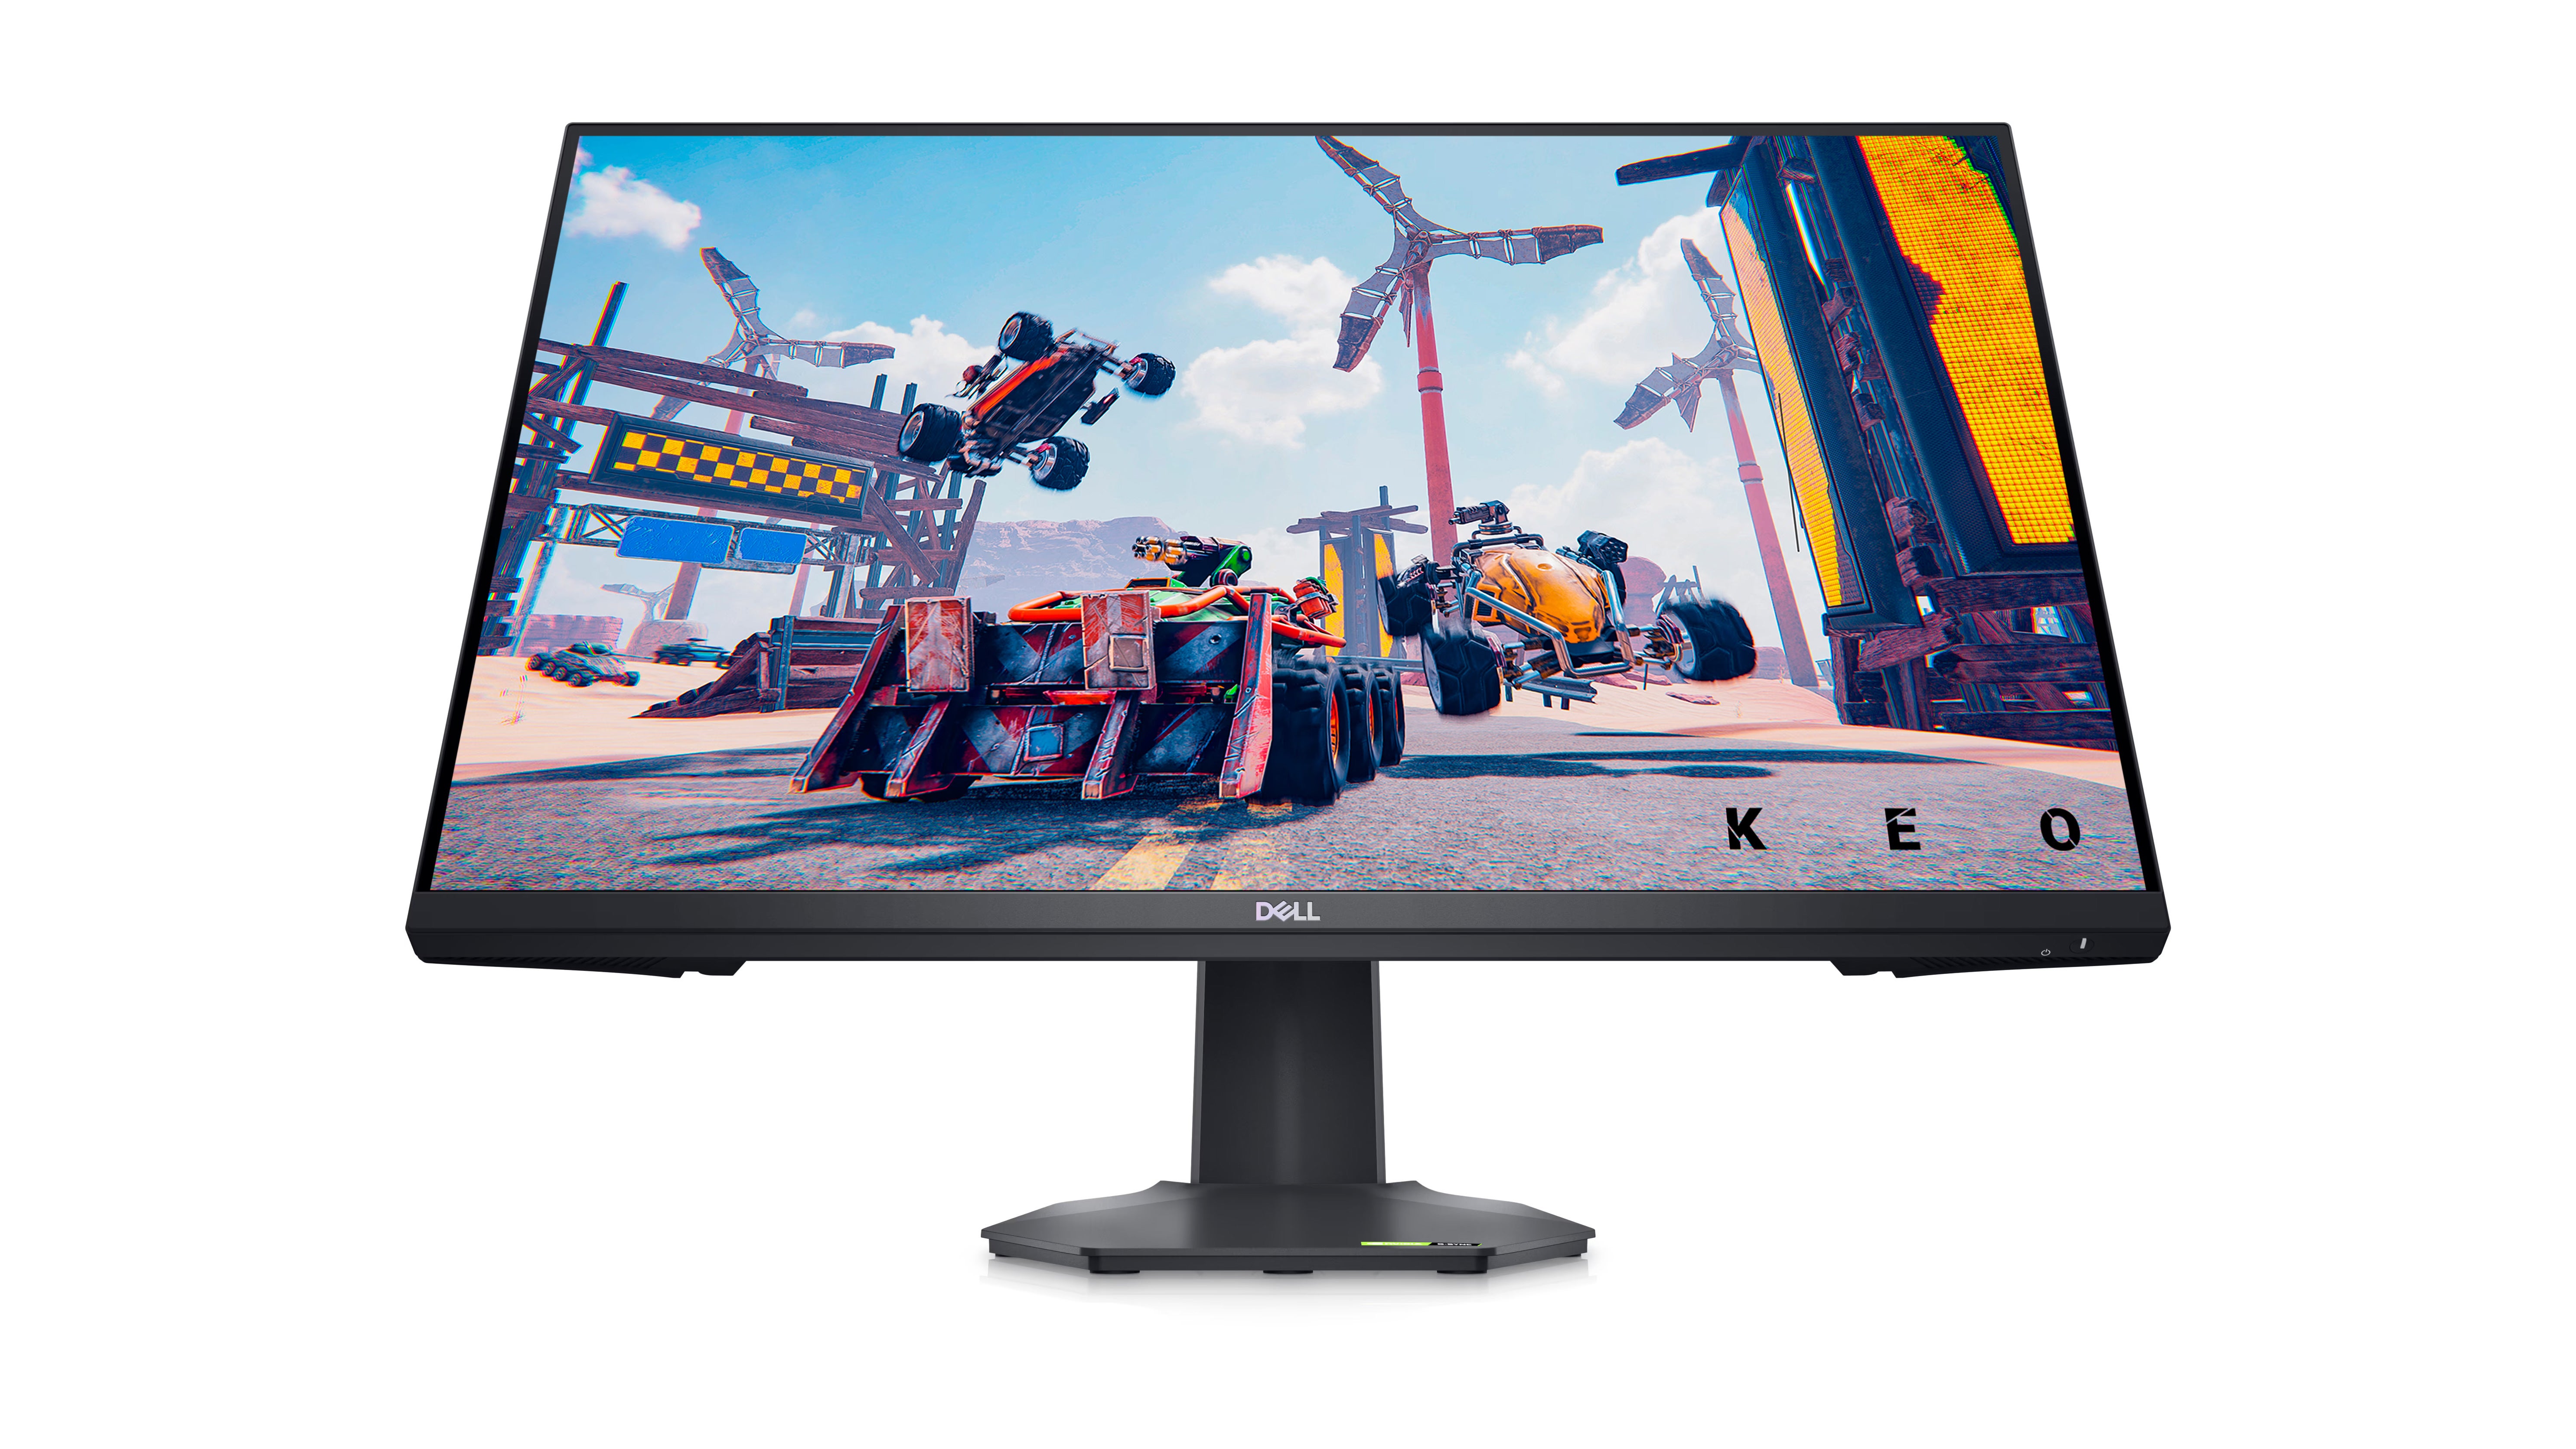 This Dell 165Hz FreeSync/G-Sync gaming monitor for £116 is a cracking Black Friday deal